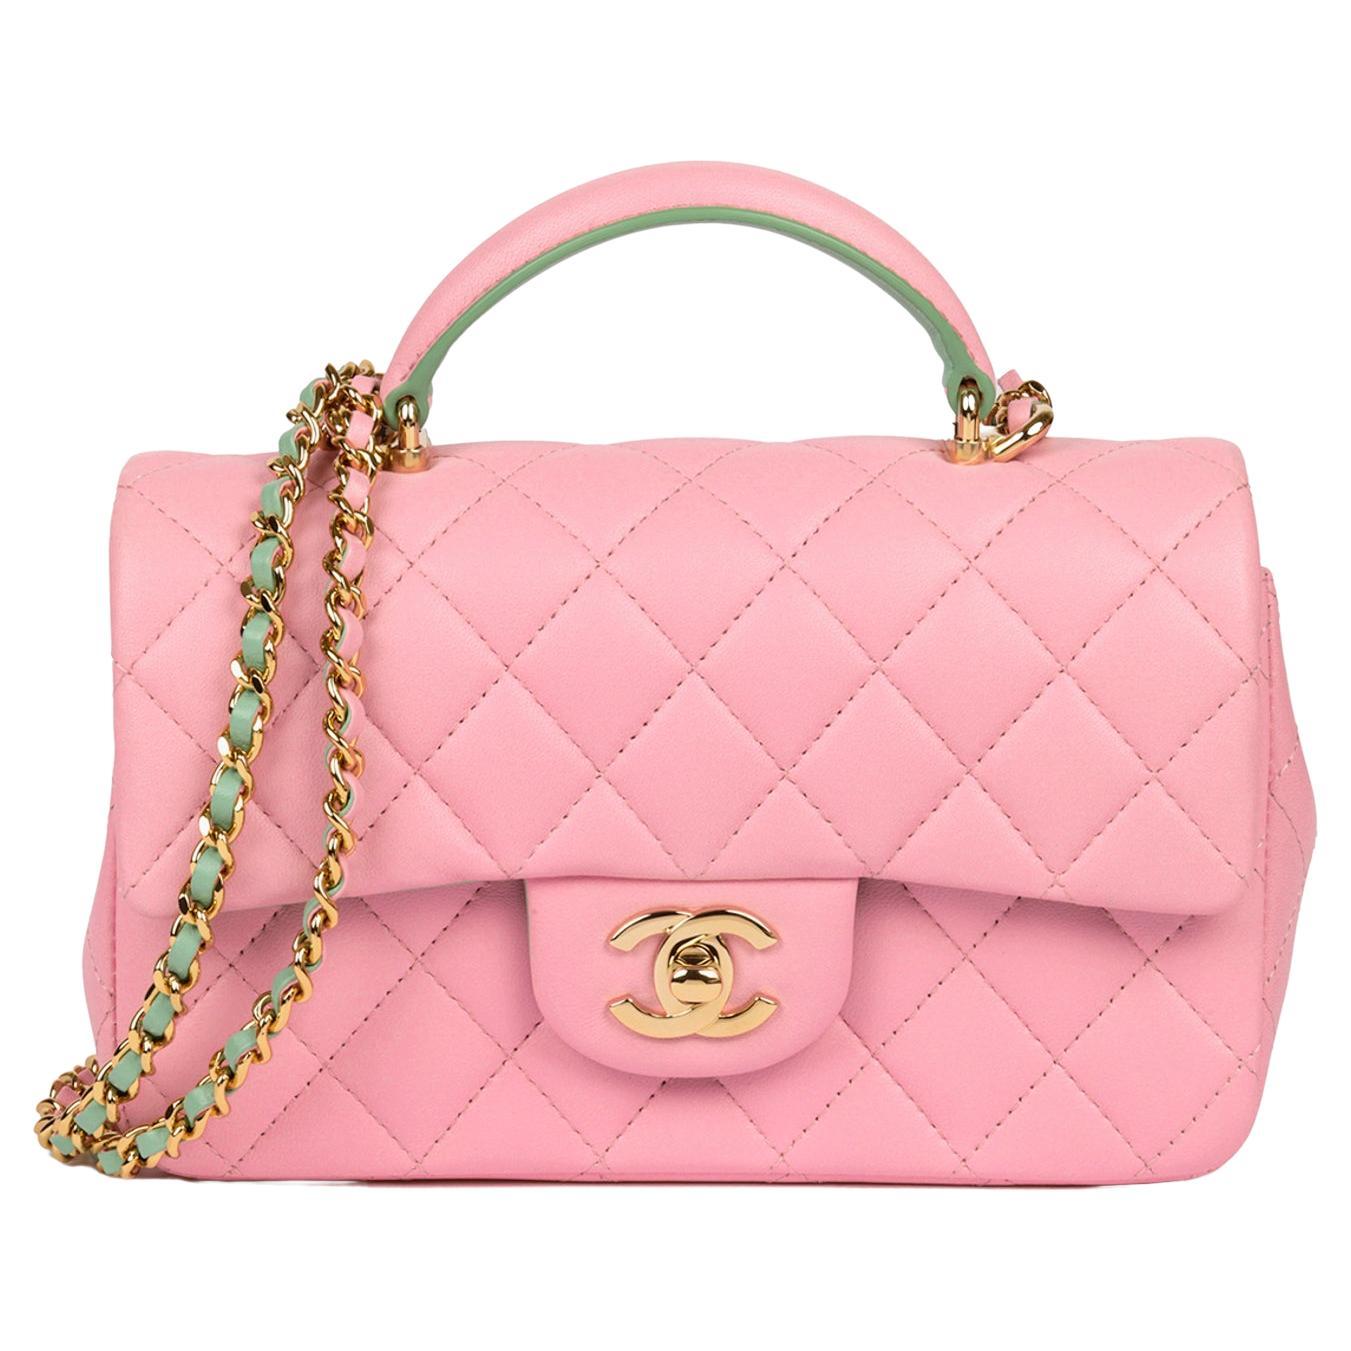 Chanel Pink & Green Quilted Lambskin Rectangular Mini Flap Bag With Top Handle